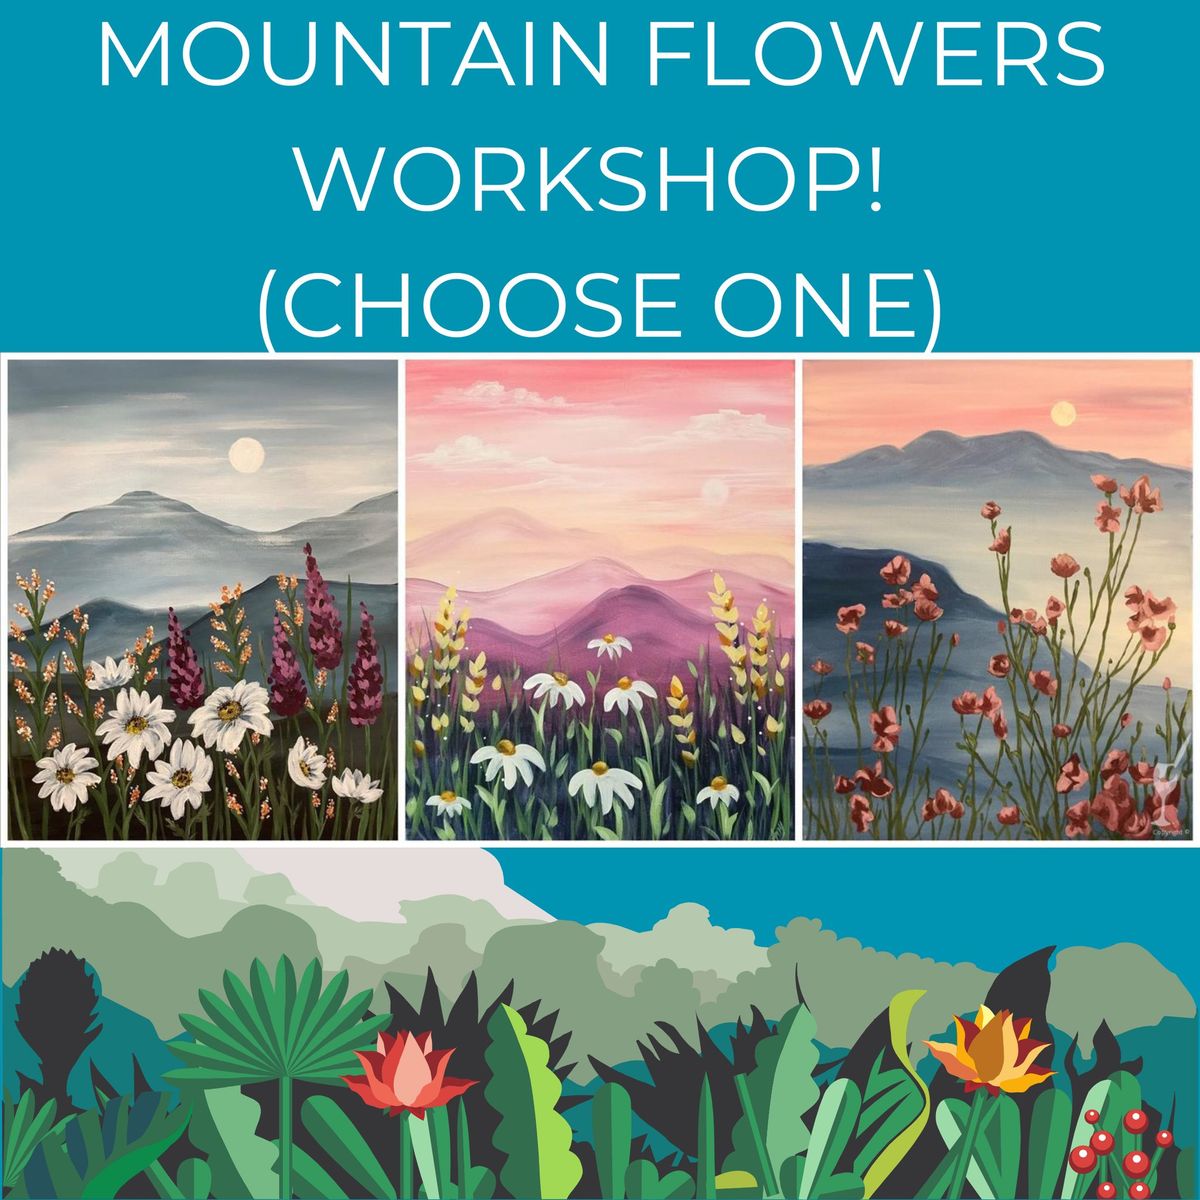 MOUNTAINS AND FLOWERS WORKSHOP! *ADD A DIY CANDLE!